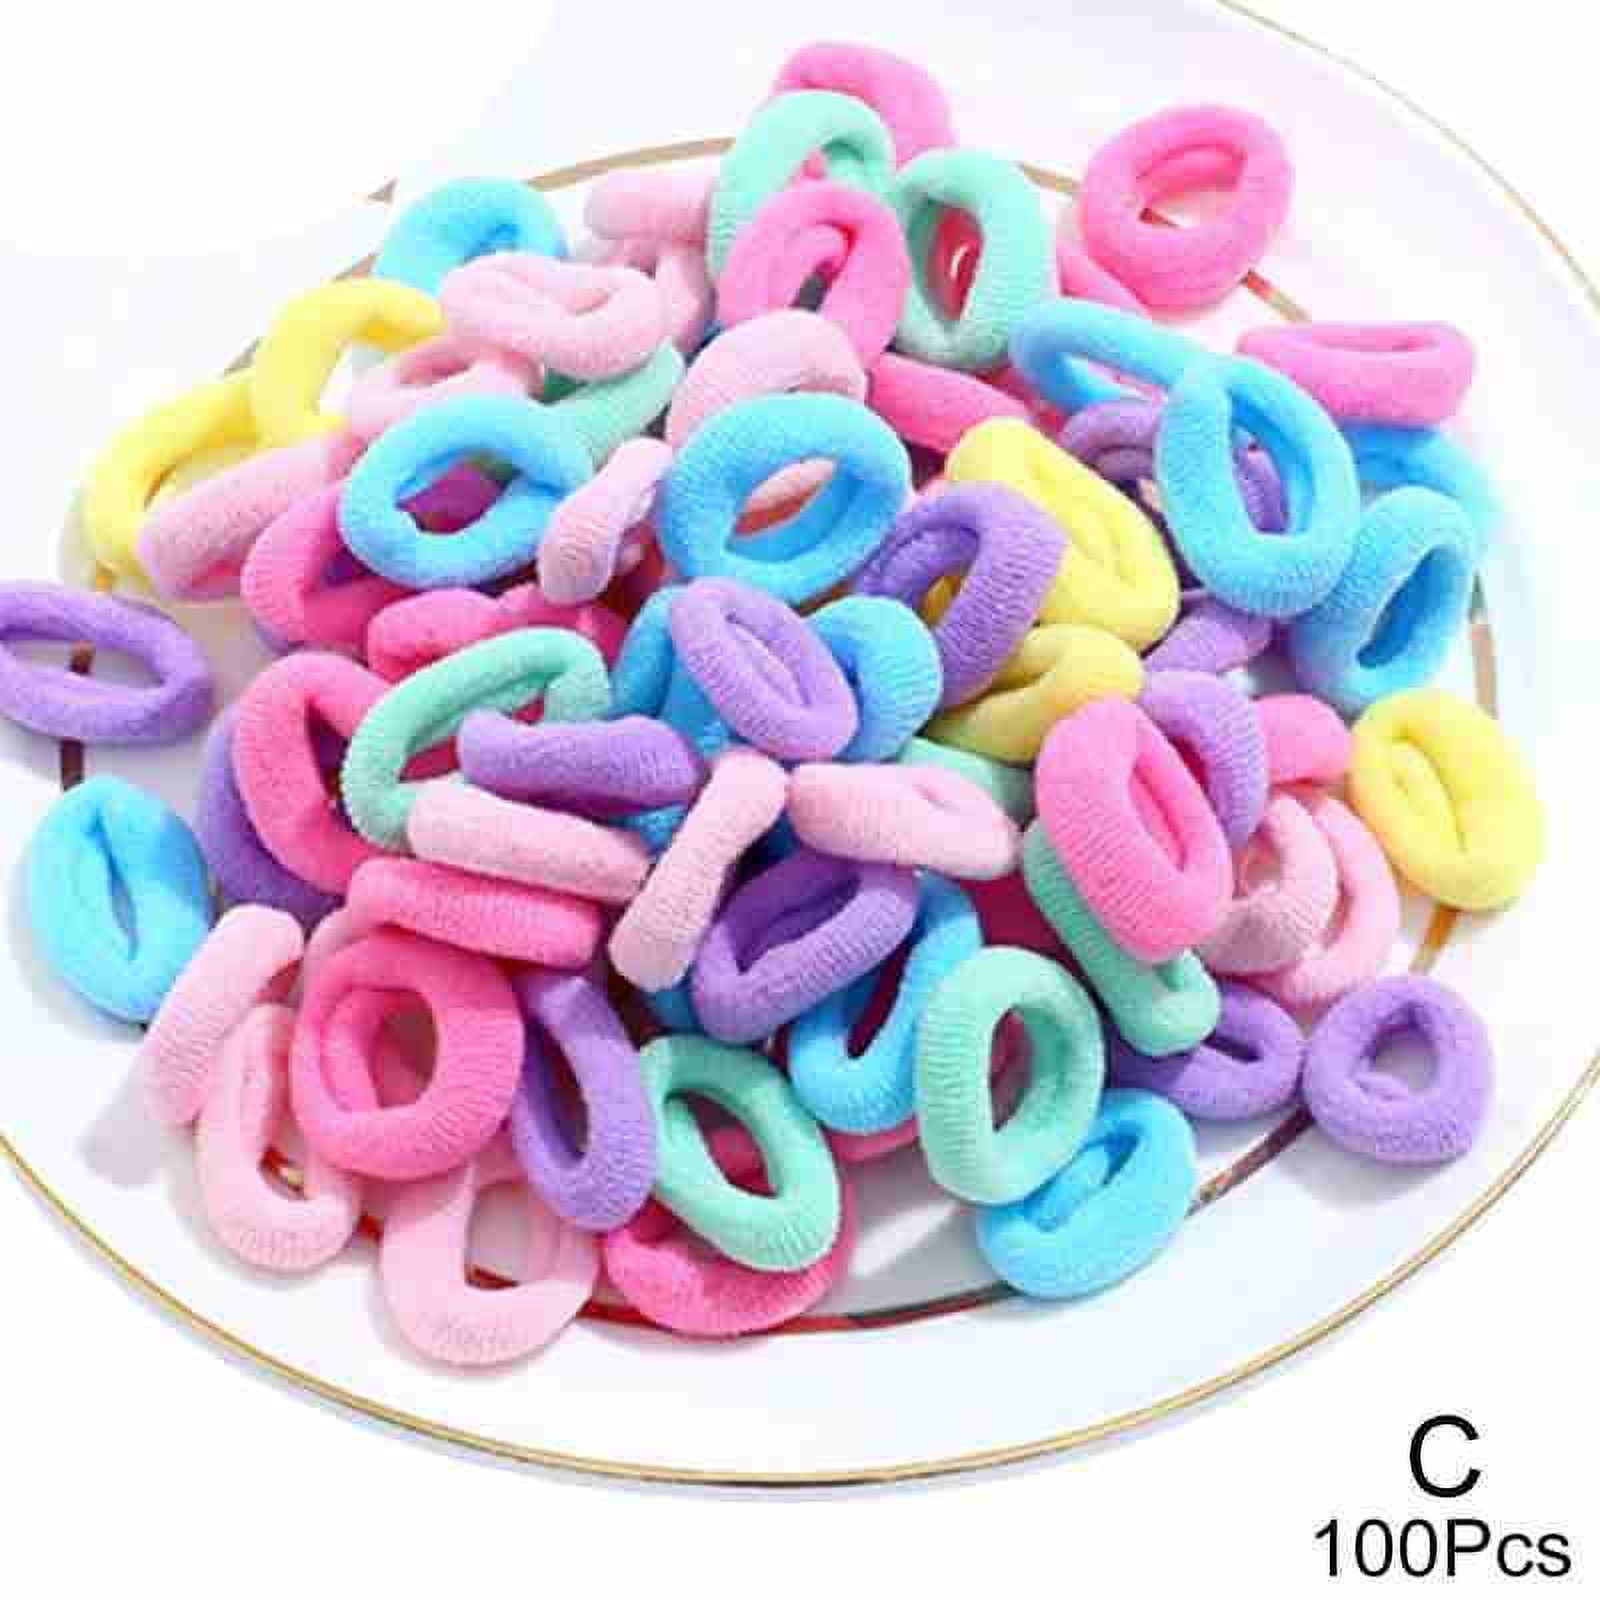 2000 Pack Mini Rubber Bands Elastic Hair Bands Soft Hair Ties with